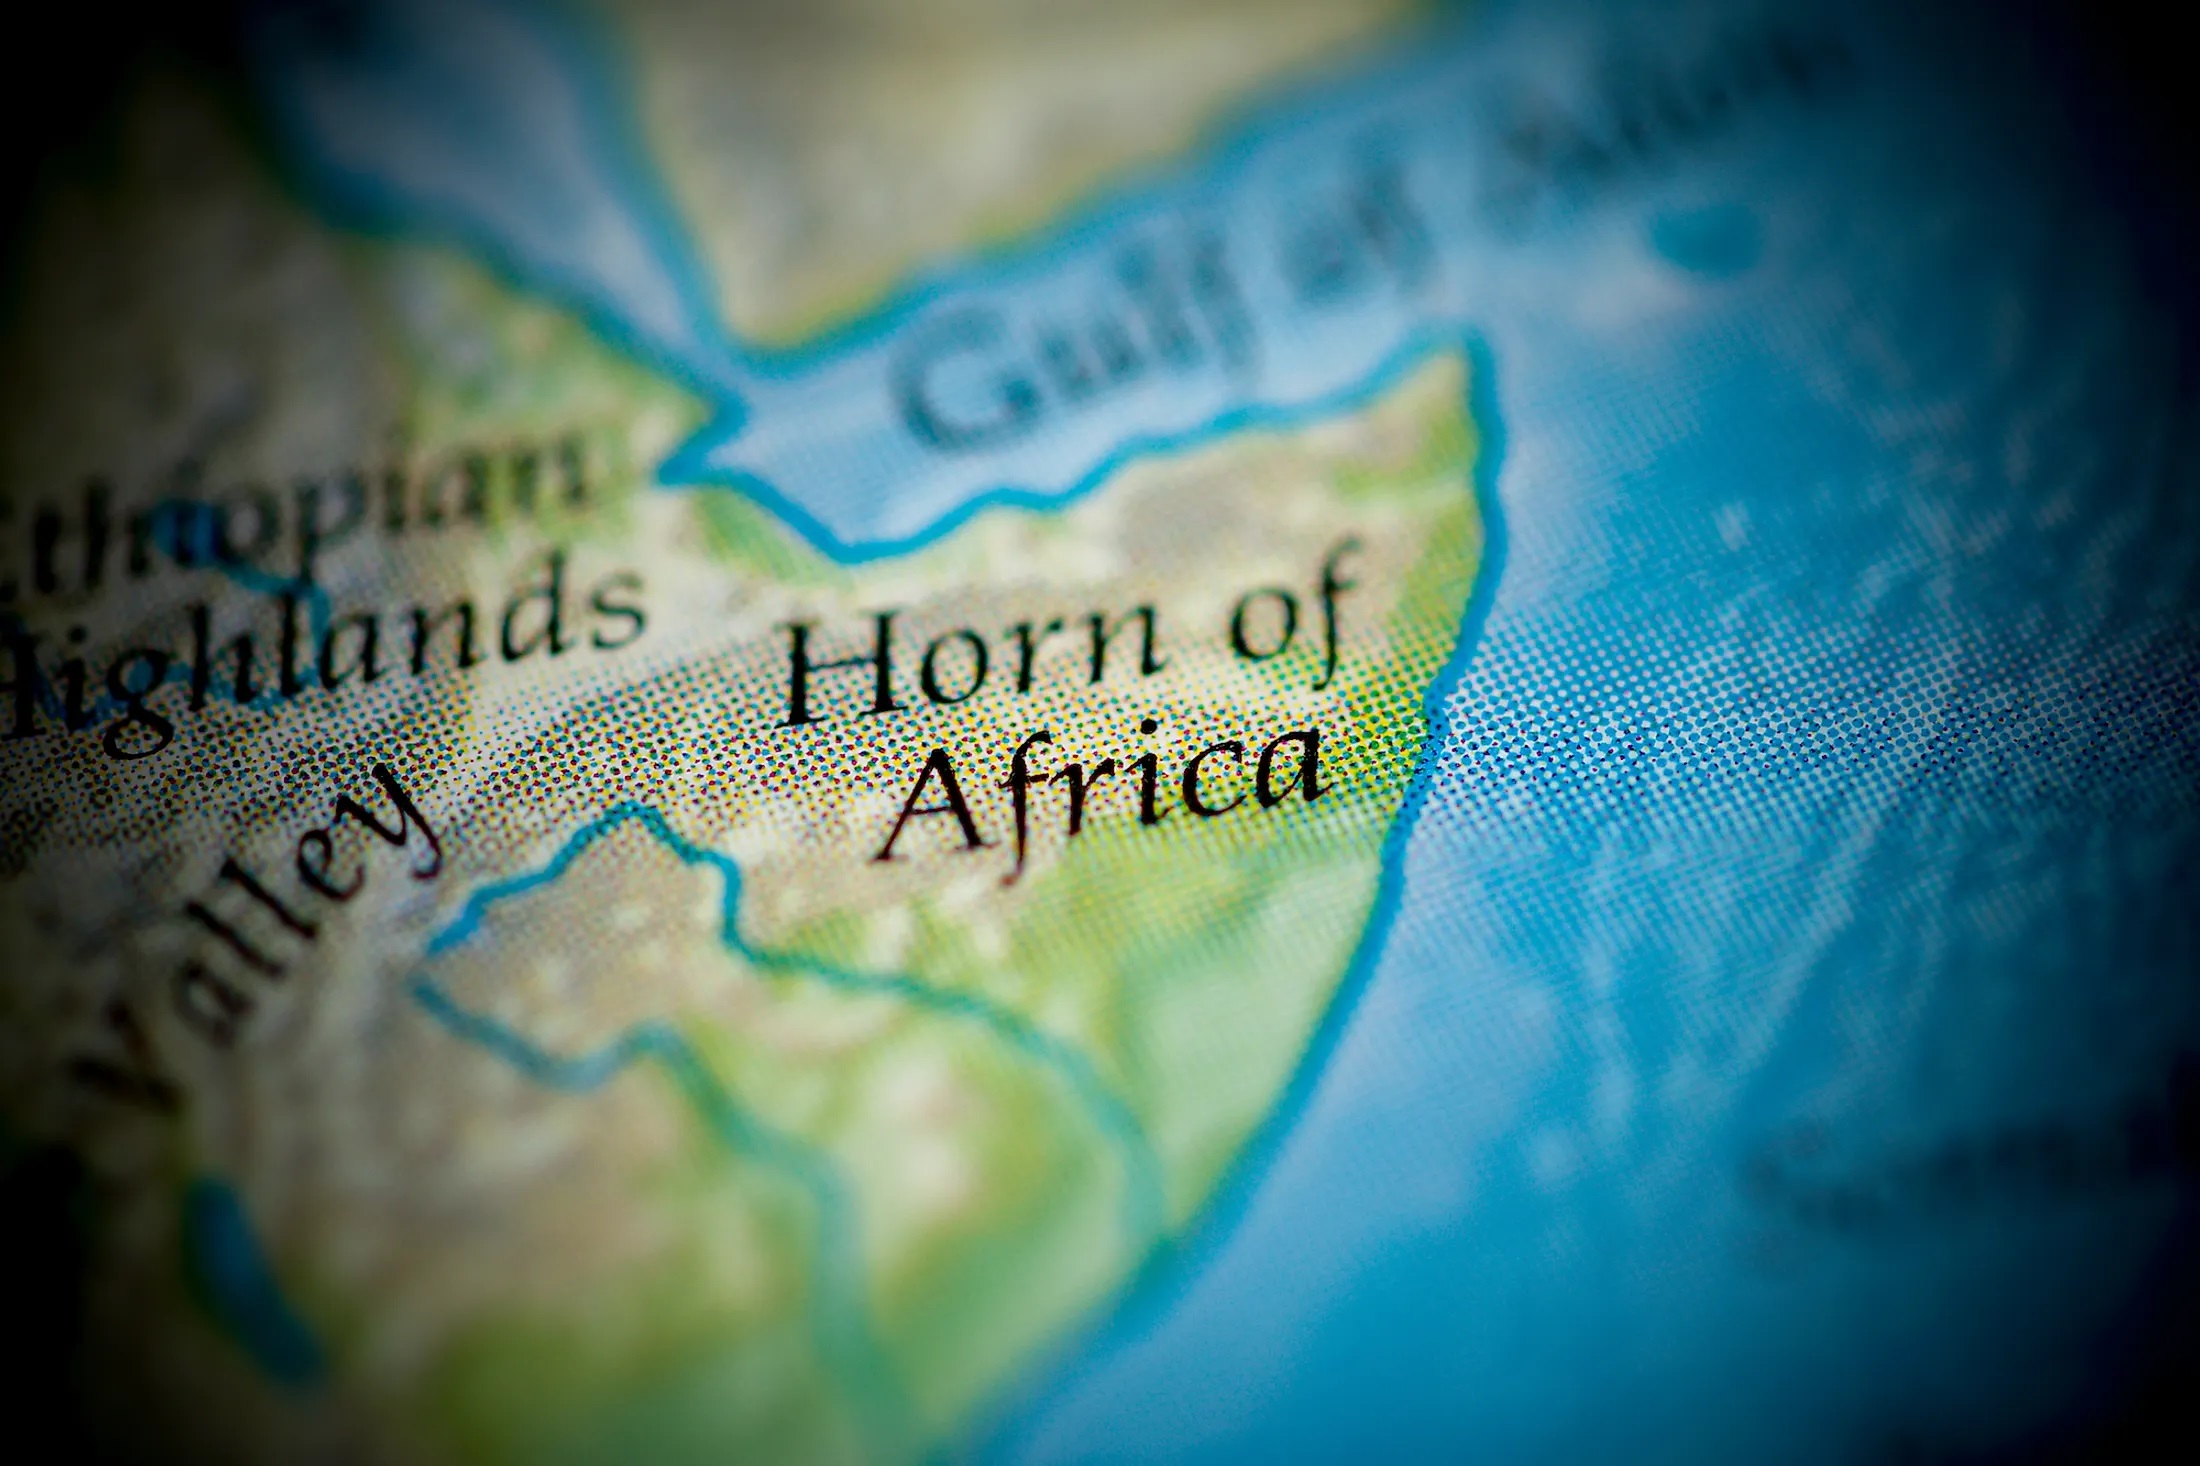 in the Horn of Africa